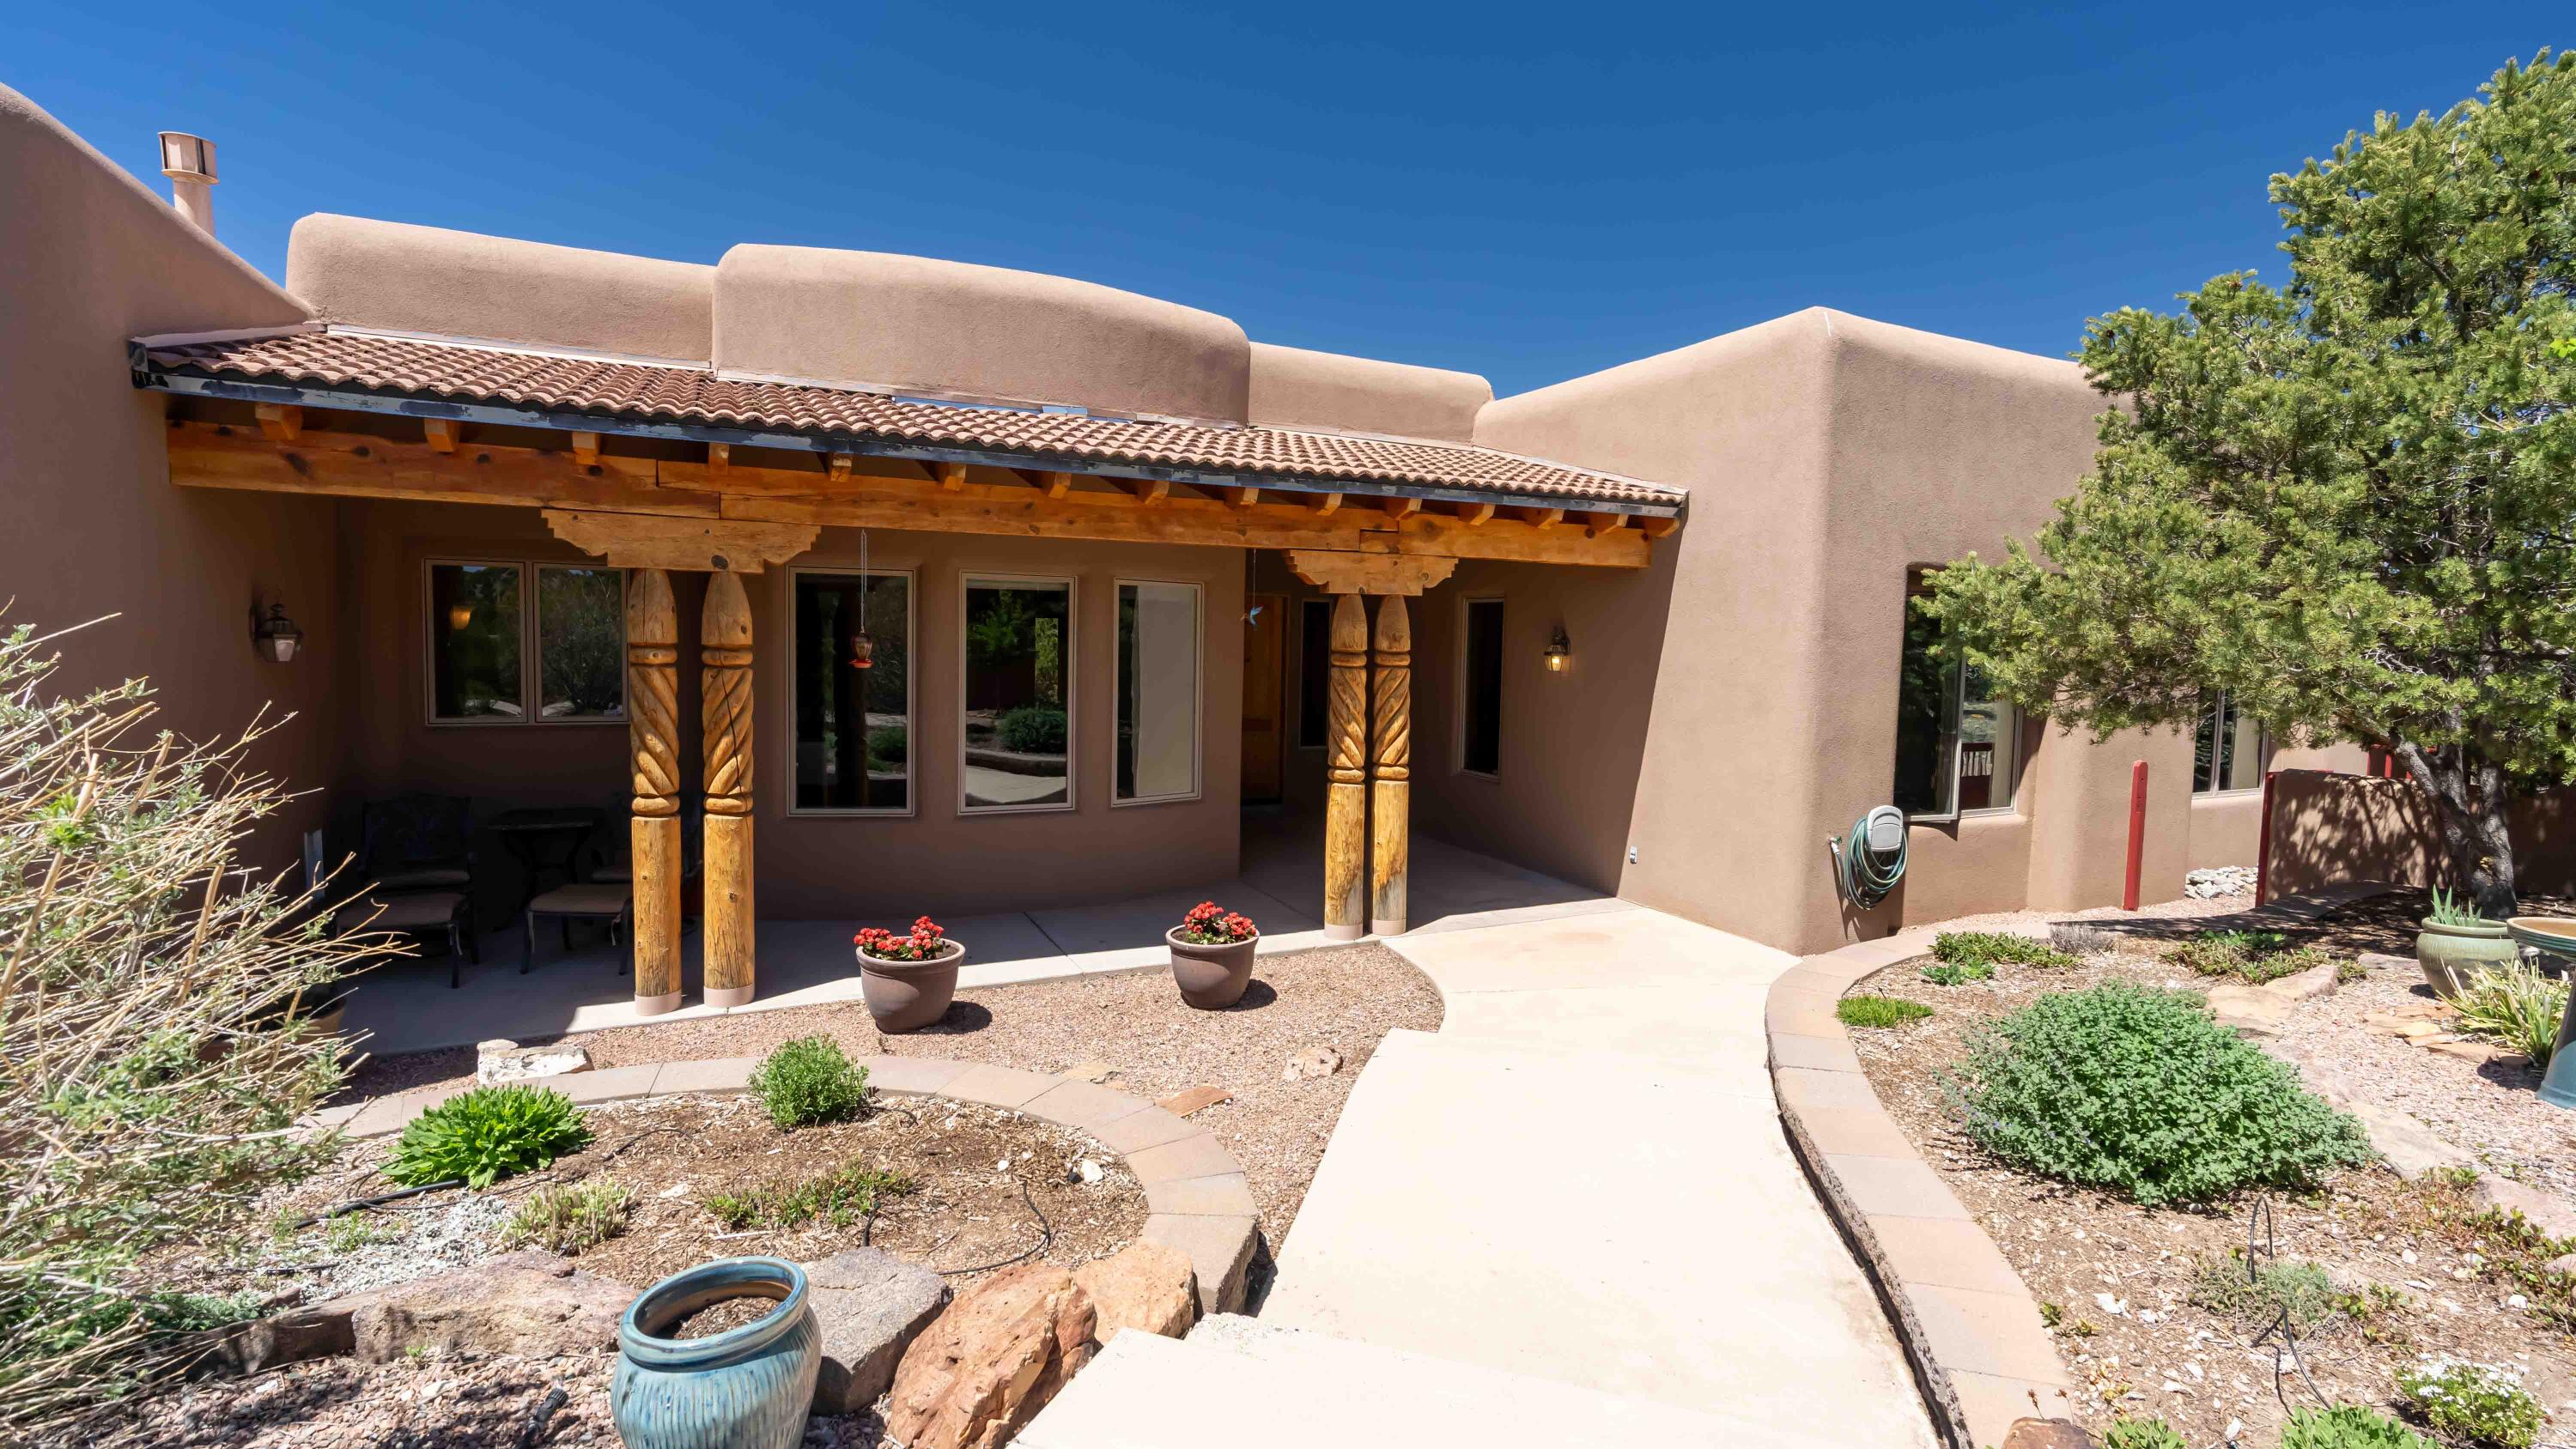 Open house Sun, 5/5, 1-4pm. Experience the charm of this stunning southwestern home located on a private 10-acre estate with breathtaking views of the Sandia Mtns. As you enter the courtyard, you are greeted by a spacious great room featuring beamed ceilings, wood accents, and cozy kiva fireplace. Custom upgraded cabinets in the kitchen & bathrooms add elegance to this beautiful home. This well-designed property boasts 3 good-sized bedrooms as well as a separate office for those who work from home. The primary bedroom features a kiva fireplace, perfect for cozy nights in. Outside, you will find a 3-car garage for your storage needs, a storage shed/playhouse & dog run. Plenty of space for outdoor activities. Discover the beauty & tranquility of this one-of-a-kind southwestern oasis.